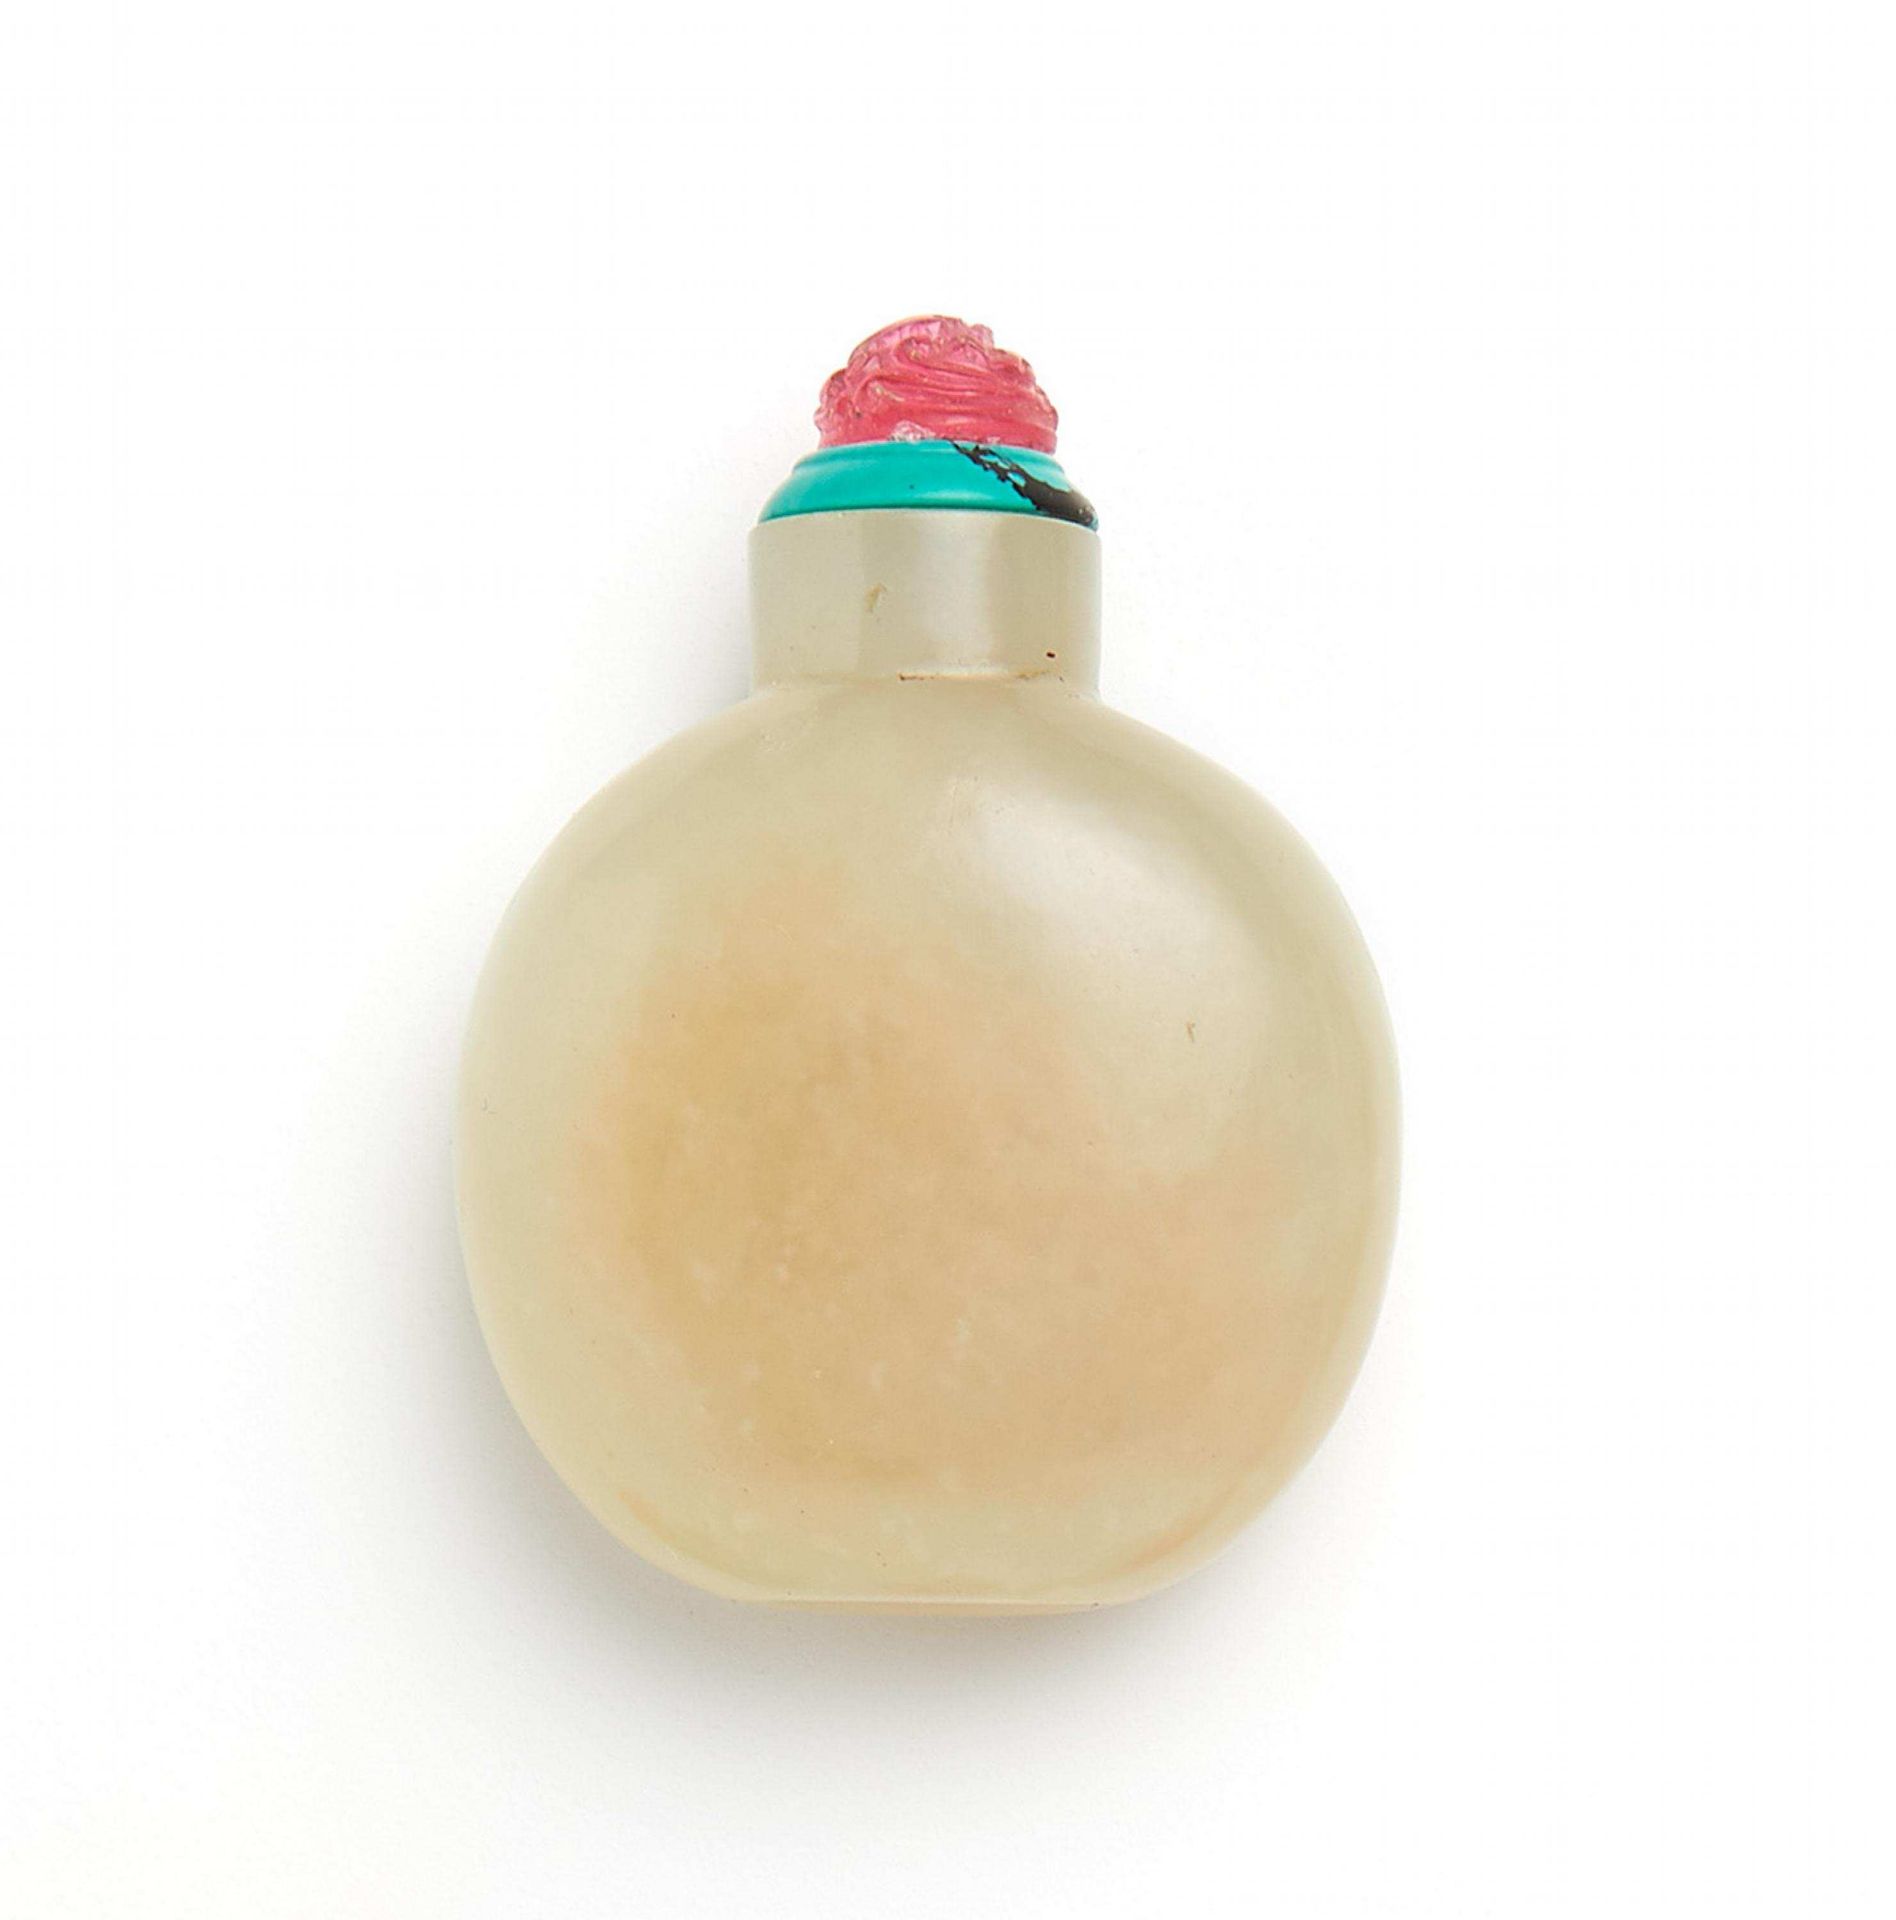 SNUFFBOTTLE. MUTTONFAT JADE. China. Qing dynasty. 18th c. Greyish white jade pebble. Both sides with